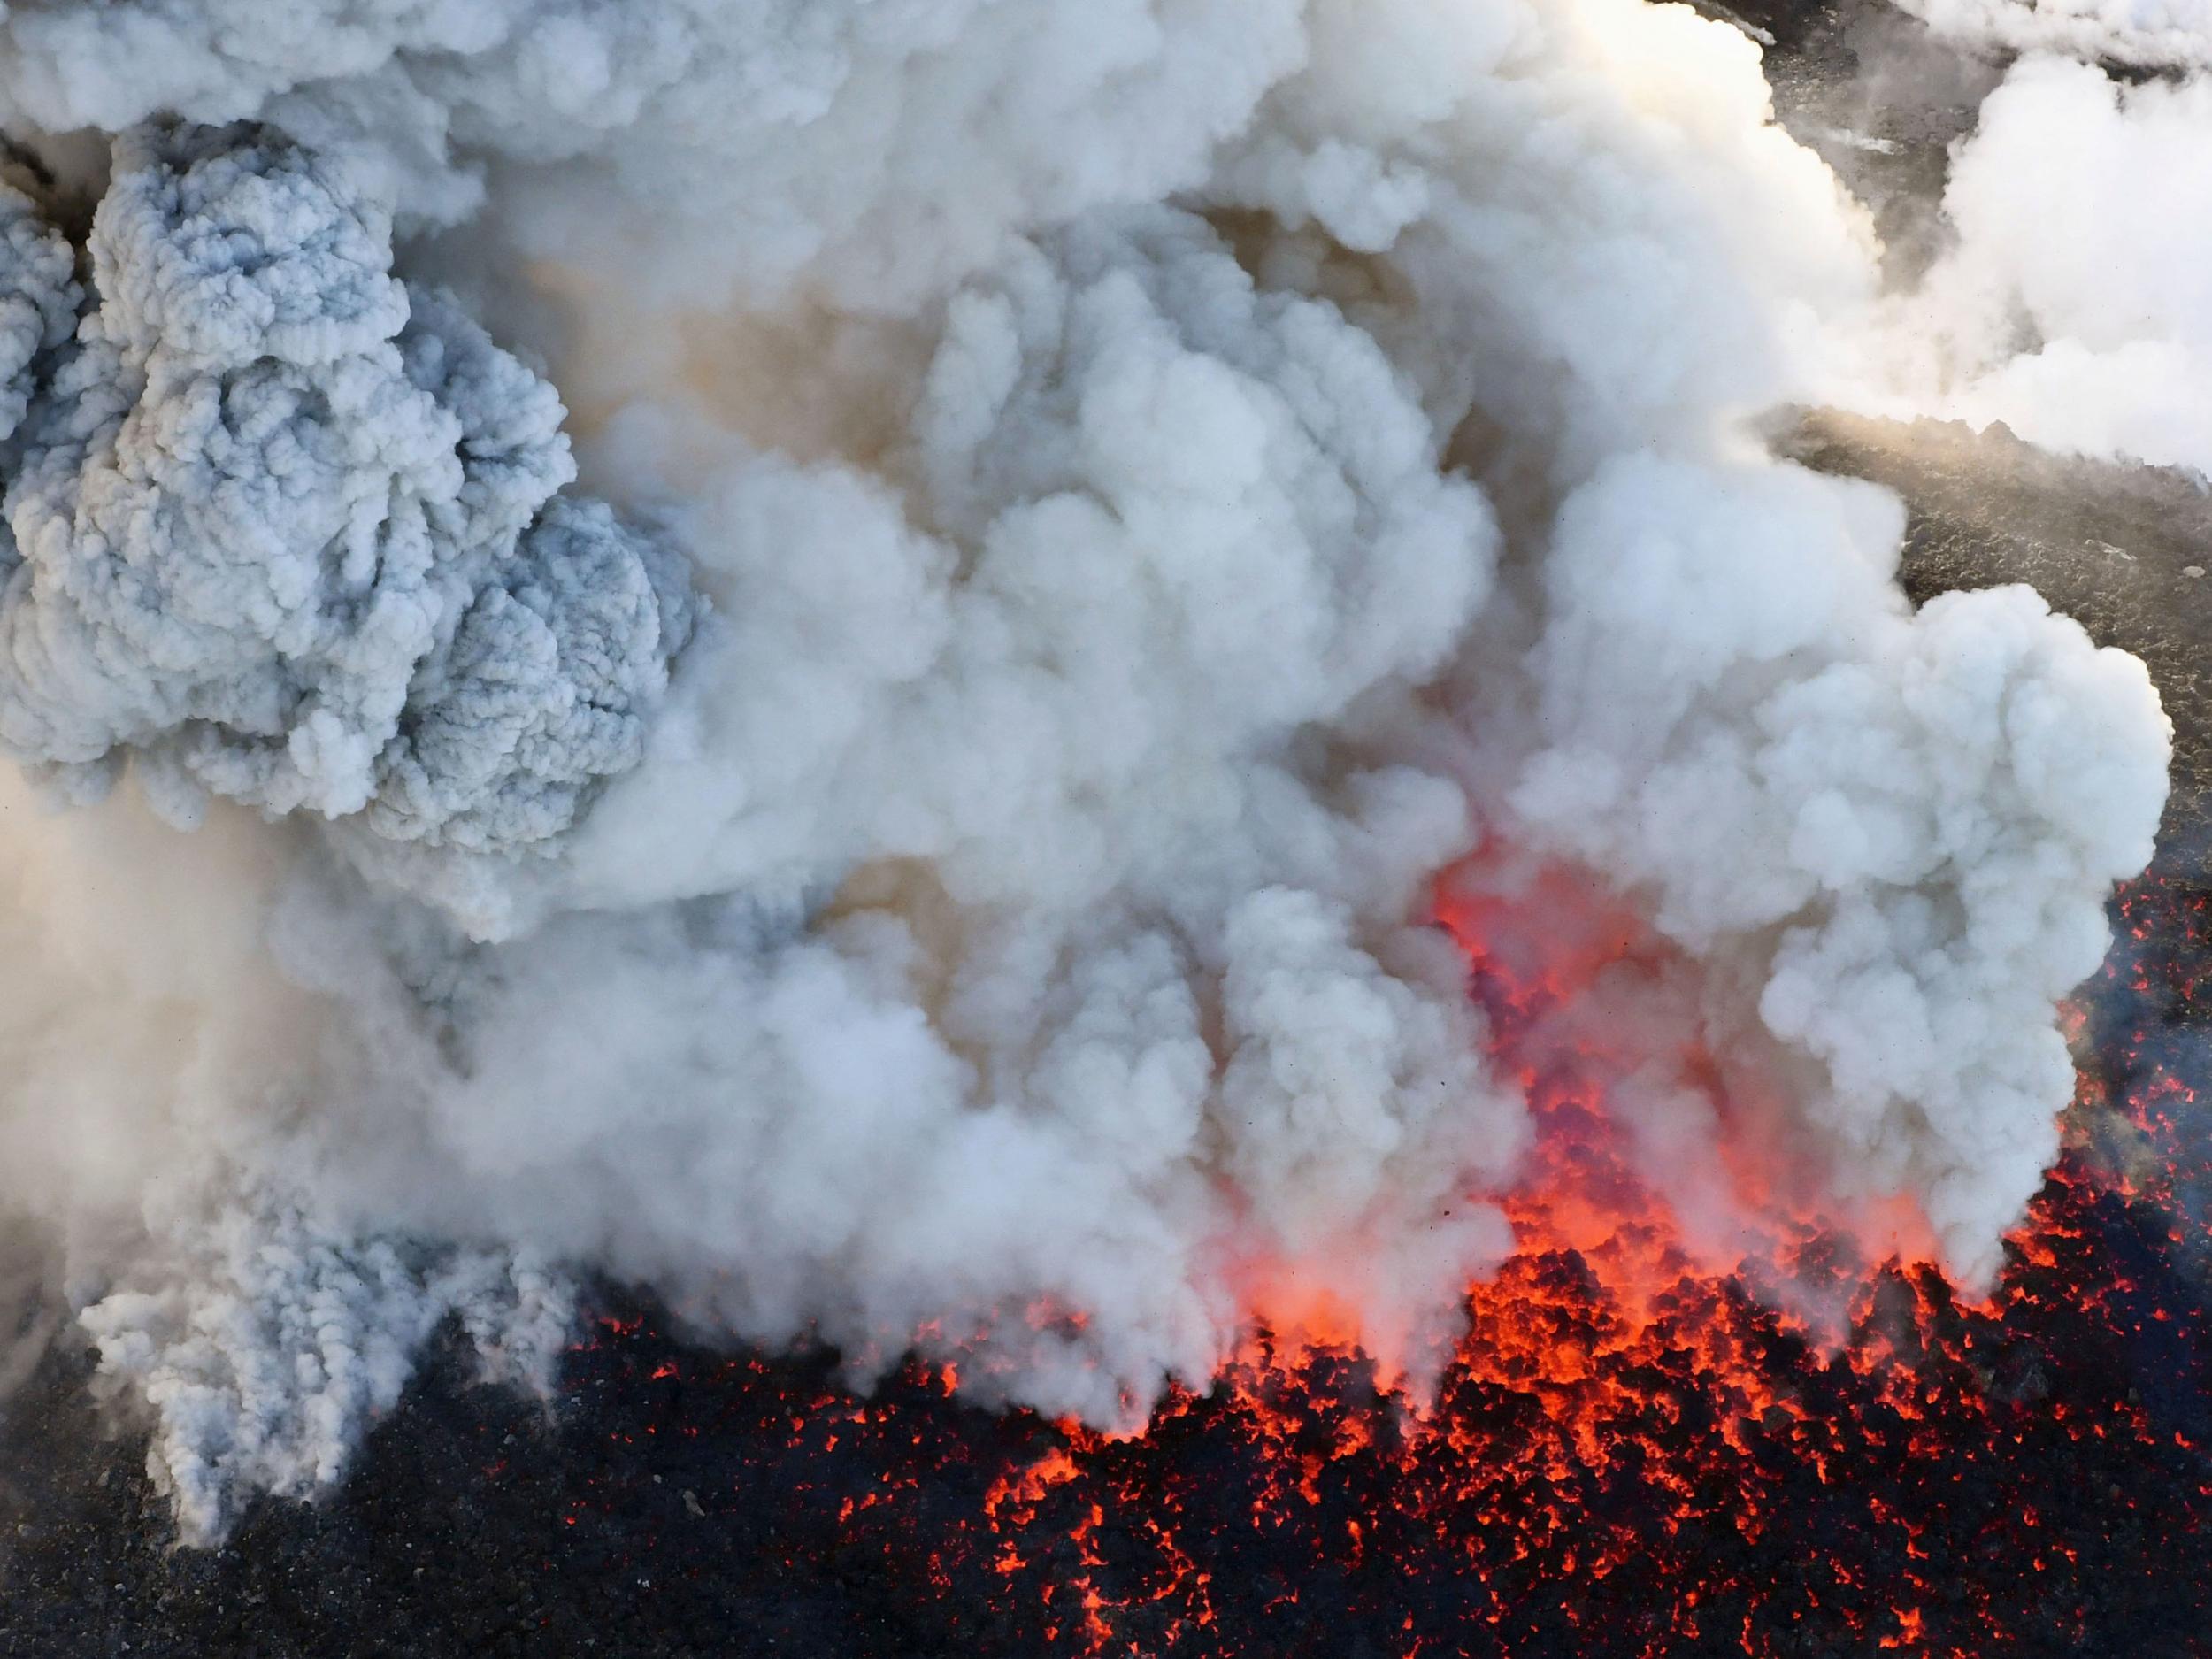 Aerial photography showed the volcano throwing plumes of smoke into the air